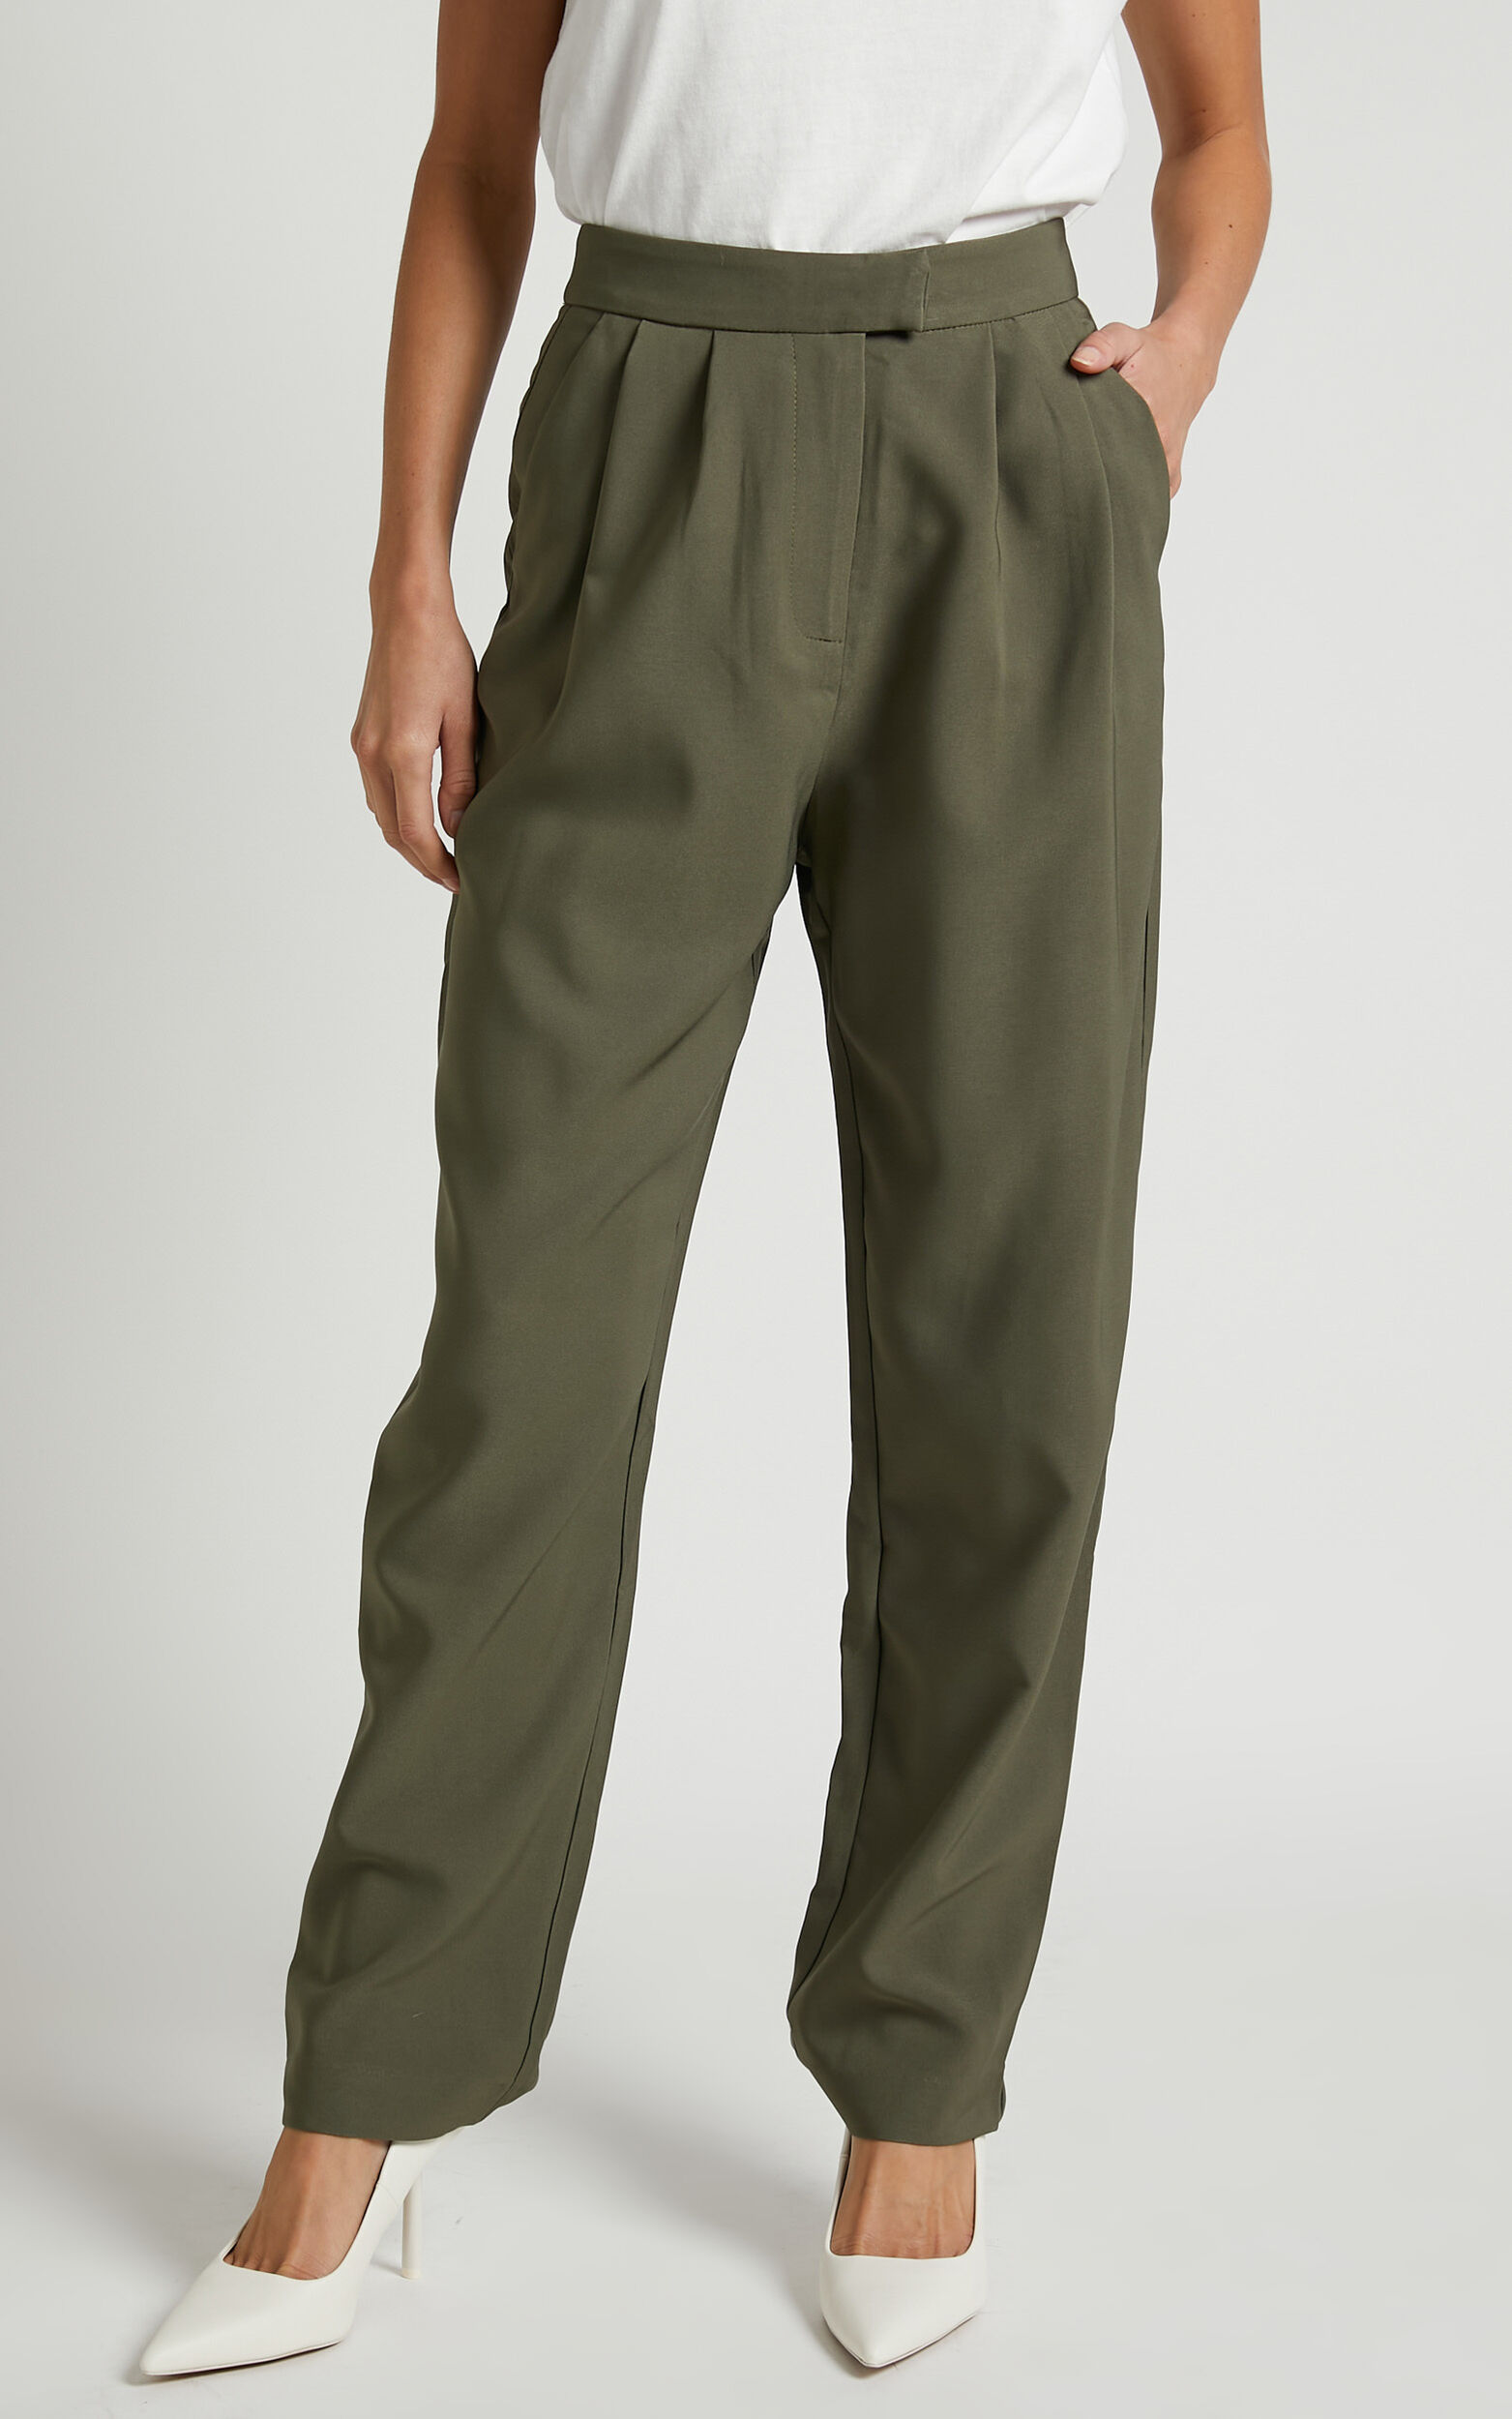 Junice Trousers - Tailored Pleated Elastic Waist Trousers in Khaki - 04, GRN1